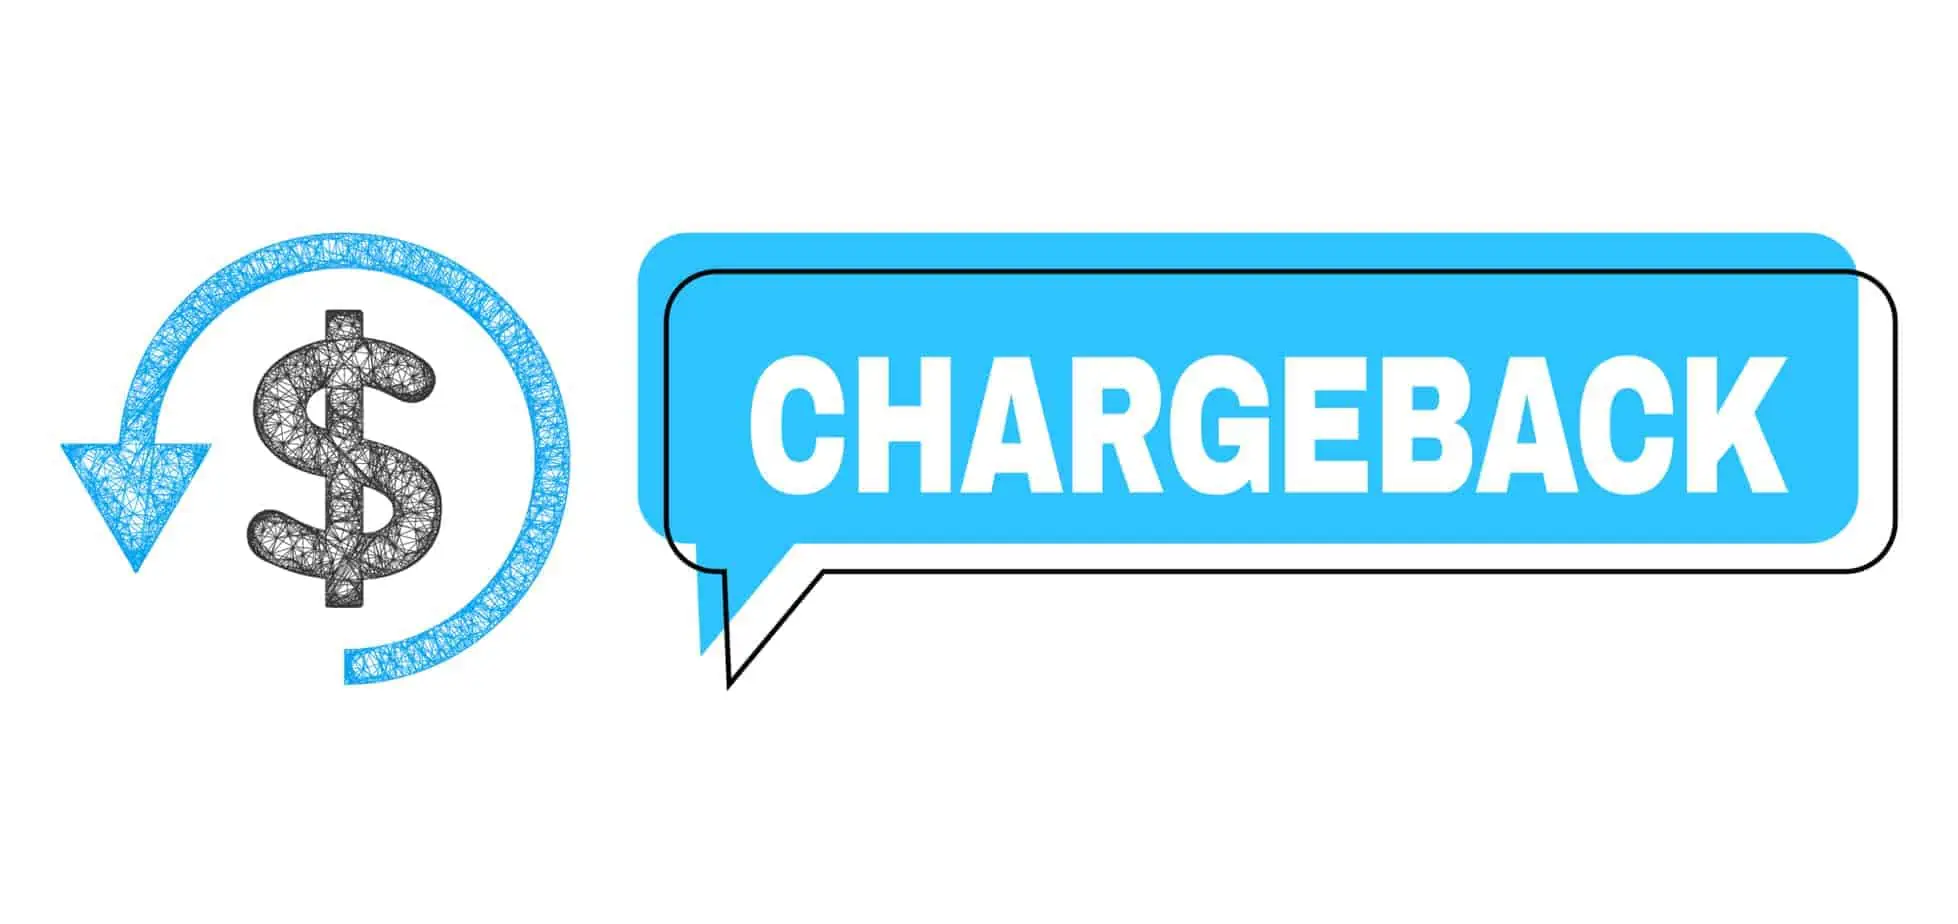 Misplaced Chargeback Chat Balloon And Net Mesh Chargeback Icon 205576513